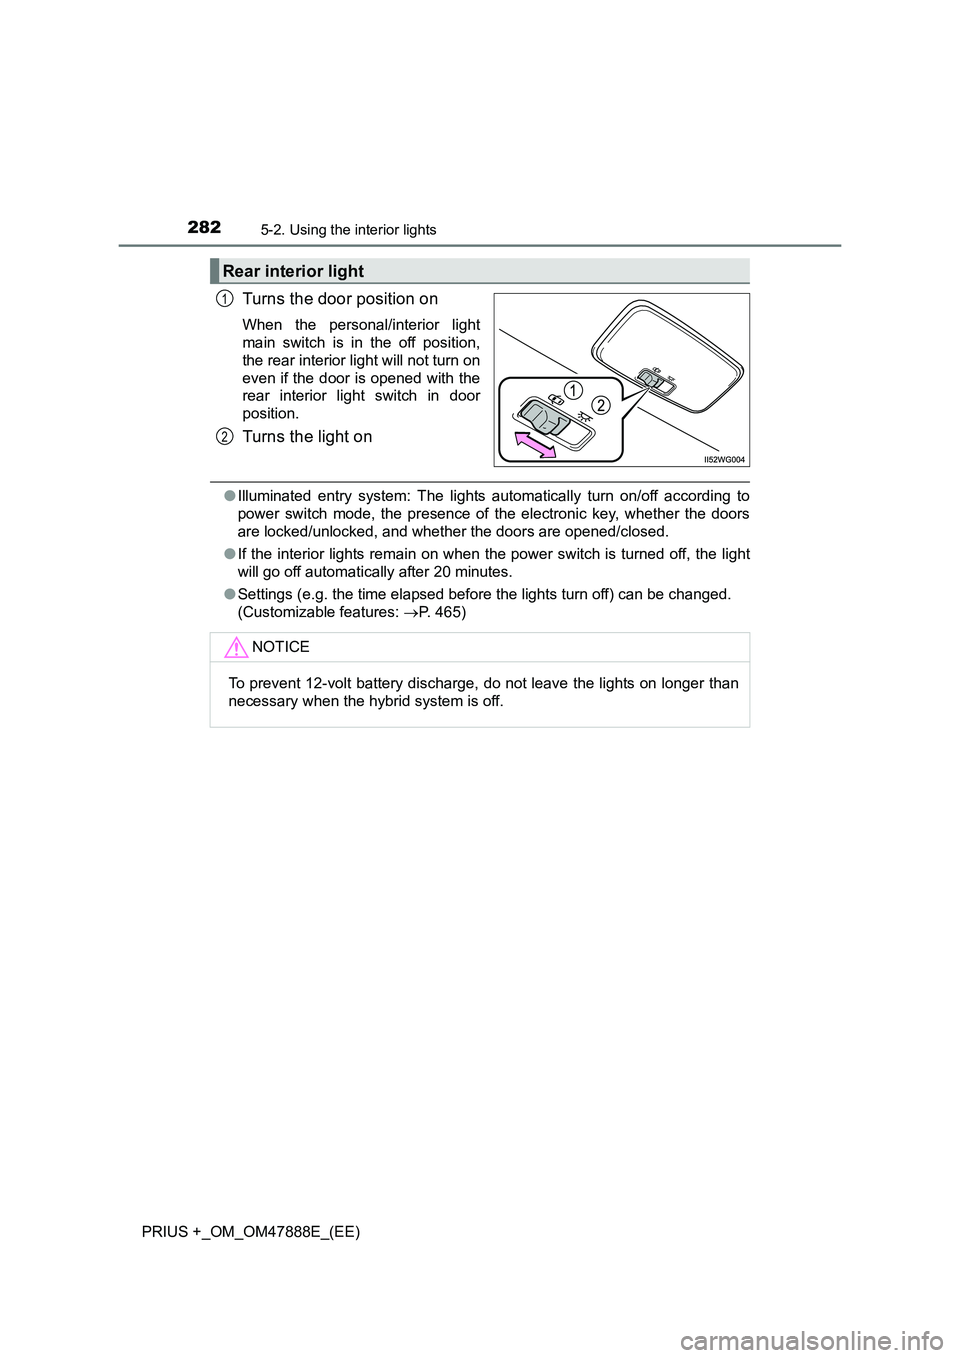 TOYOTA PRIUS PLUS 2014  Owners Manual 2825-2. Using the interior lights
PRIUS +_OM_OM47888E_(EE)
Turns the door position on
When the personal/interior light
main switch is in the off position,
the rear interior light will not turn on
even